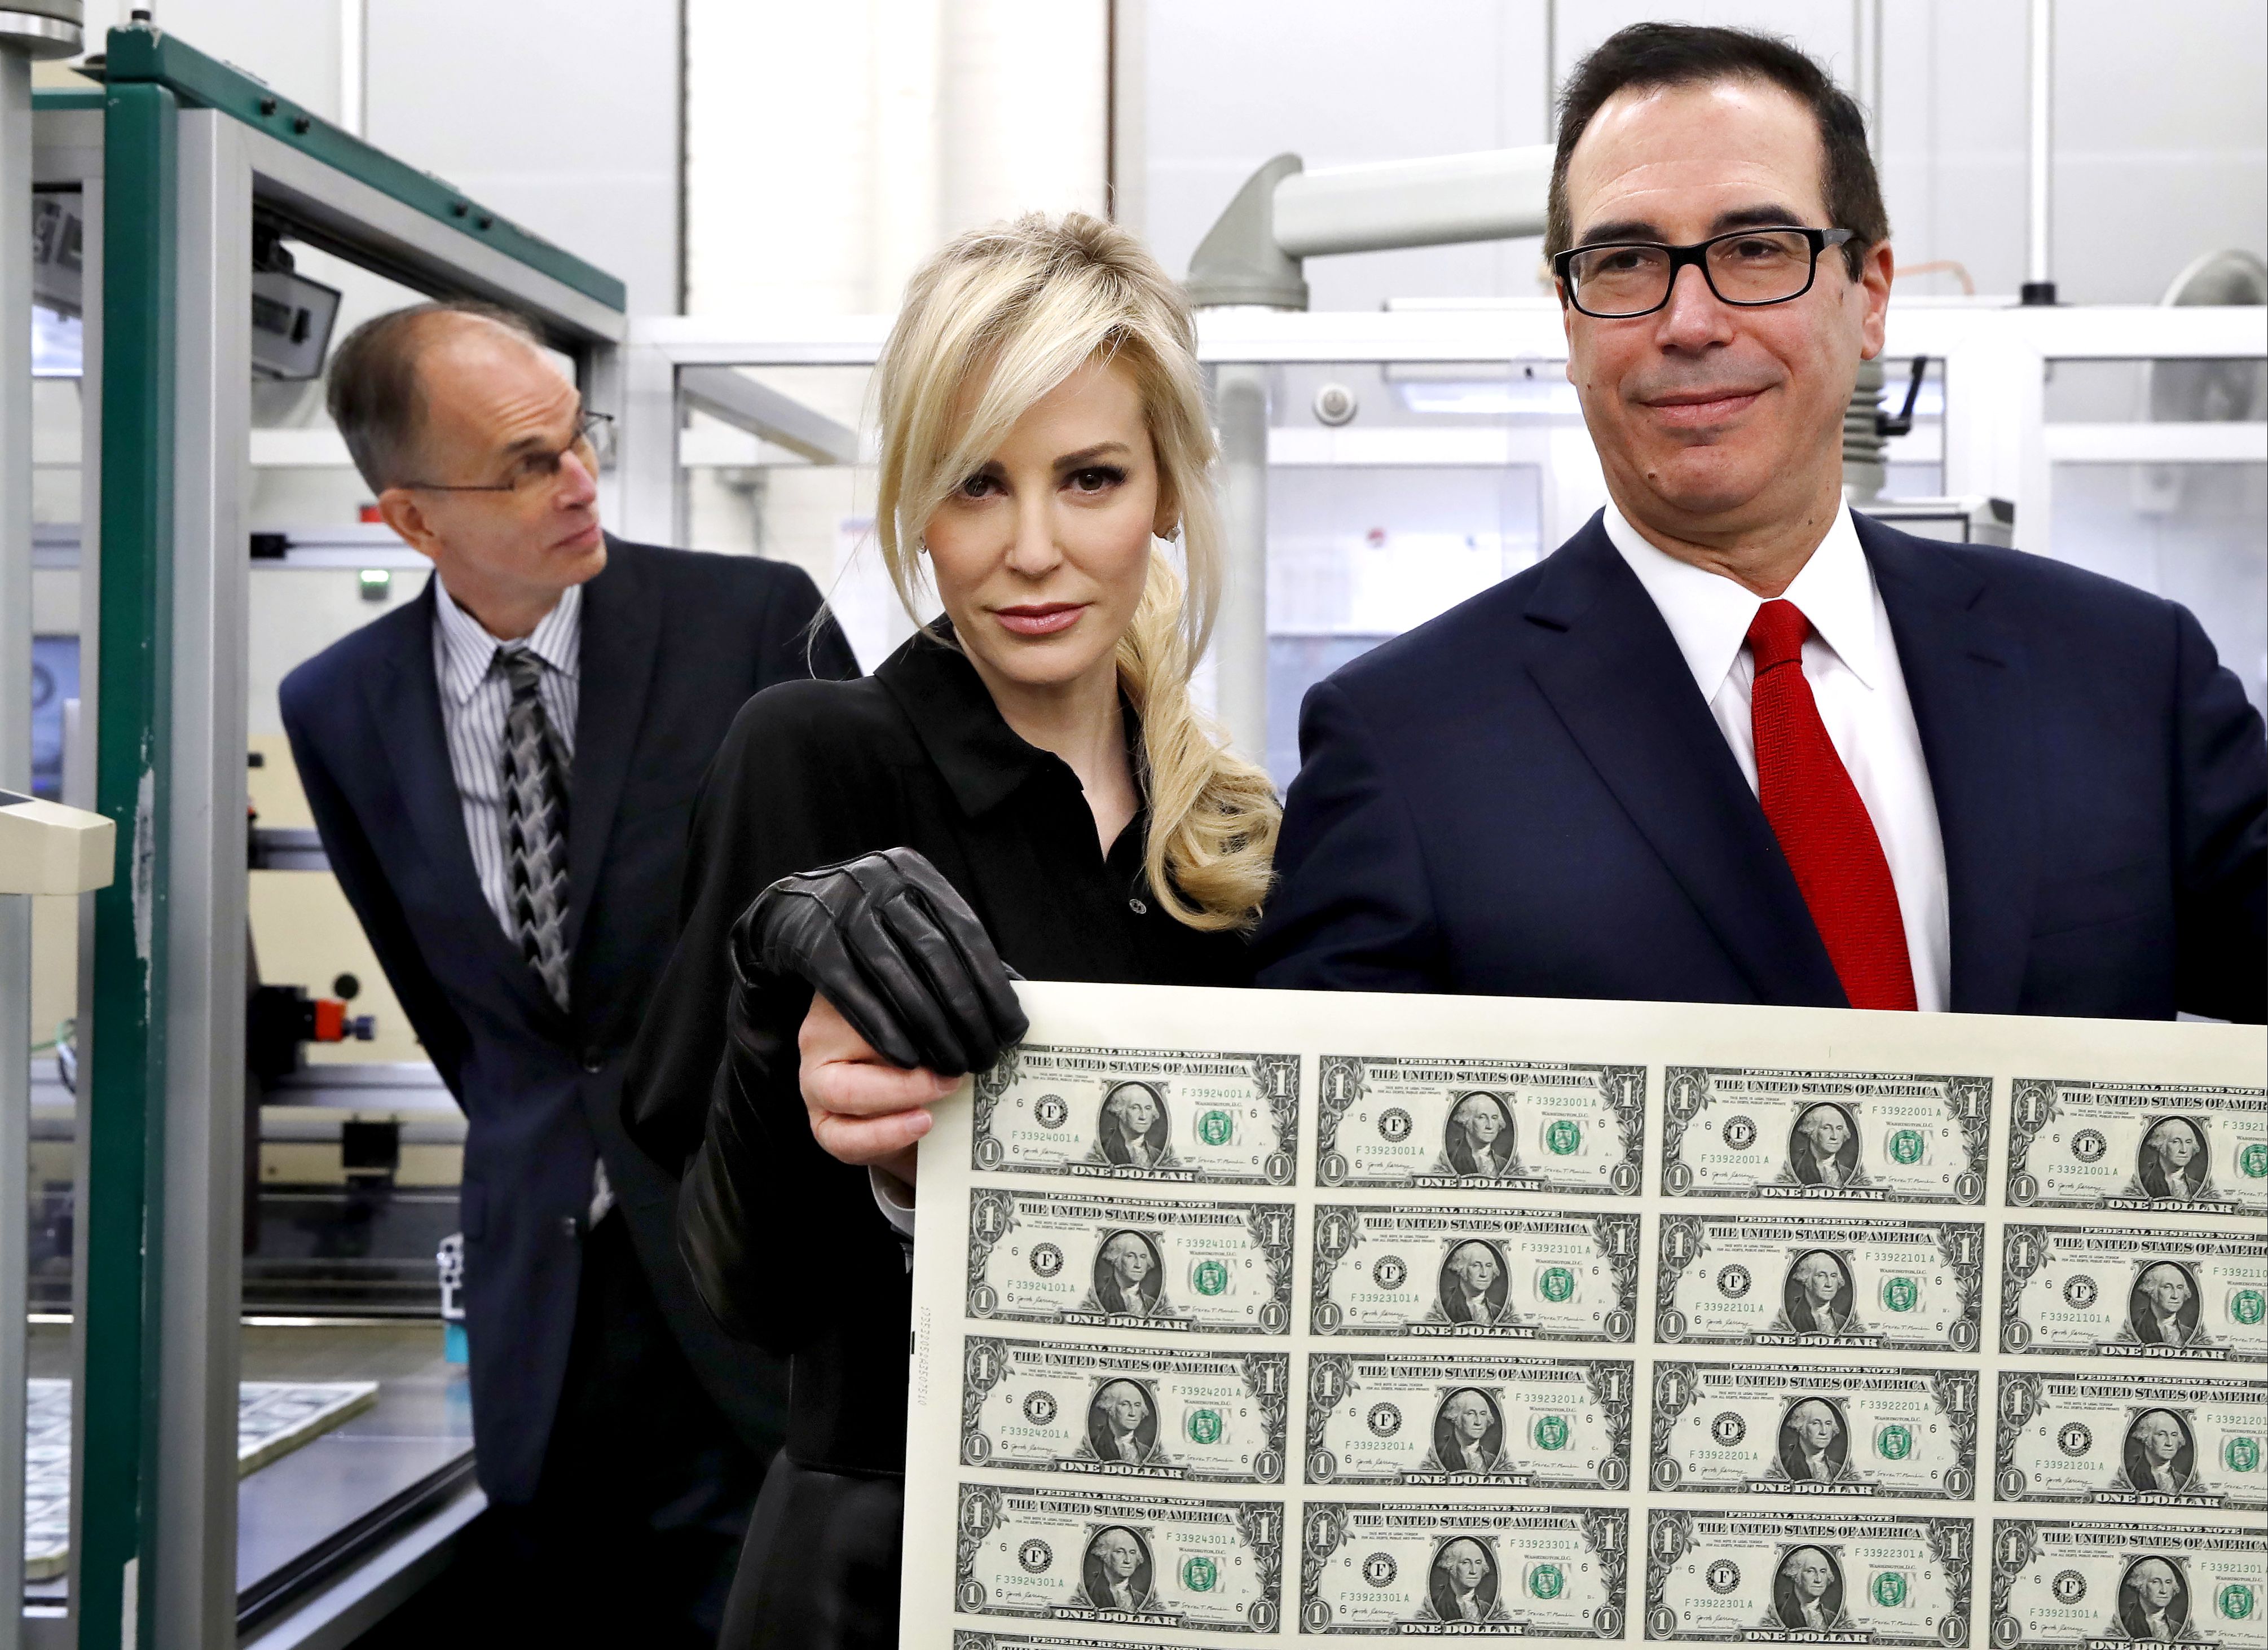 Treasury Secretary Steven Mnuchin, right, and his wife Louise Linton, hold up a sheet of new $1 bills, the first currency notes bearing his and U.S. Treasurer Jovita Carranza's signatures, in Washington on Nov. 15.